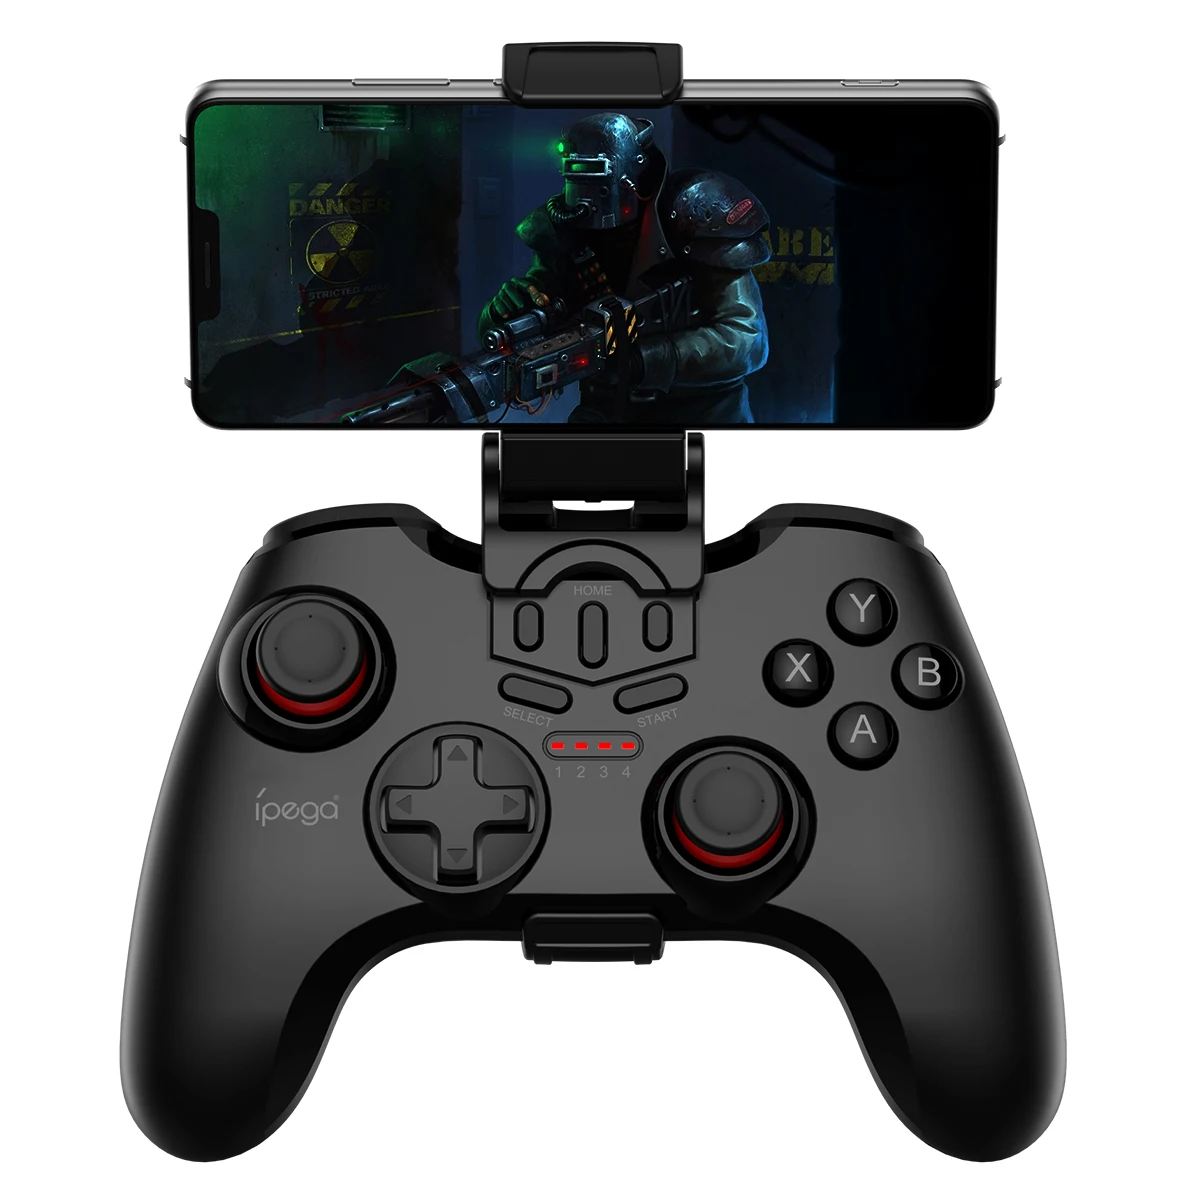 Mobile Game Controller,Bluetooth Wireless Gamepad Gaming Joystick for iOS  Android Phone/ PC Windows/ PS4/ PS3/ Smart TV